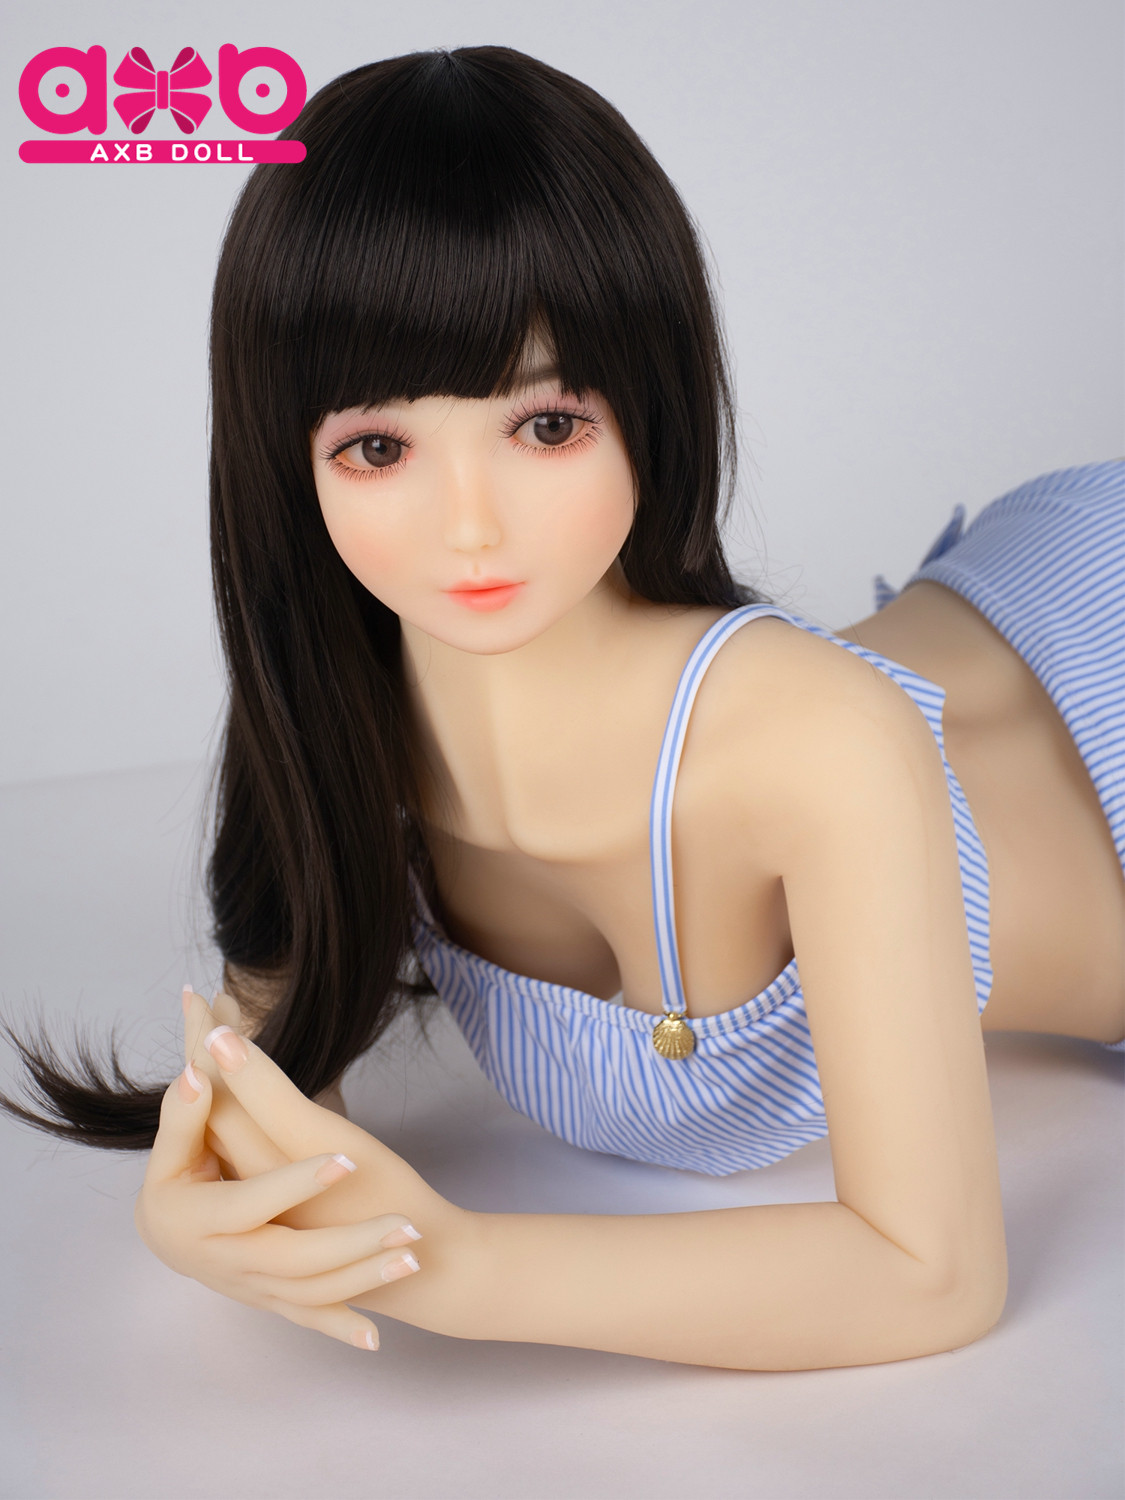 AXBDOLL 140cm A84# TPE Oral Love Doll Life Size Sex Dolls - 画像をクリックして閉じます